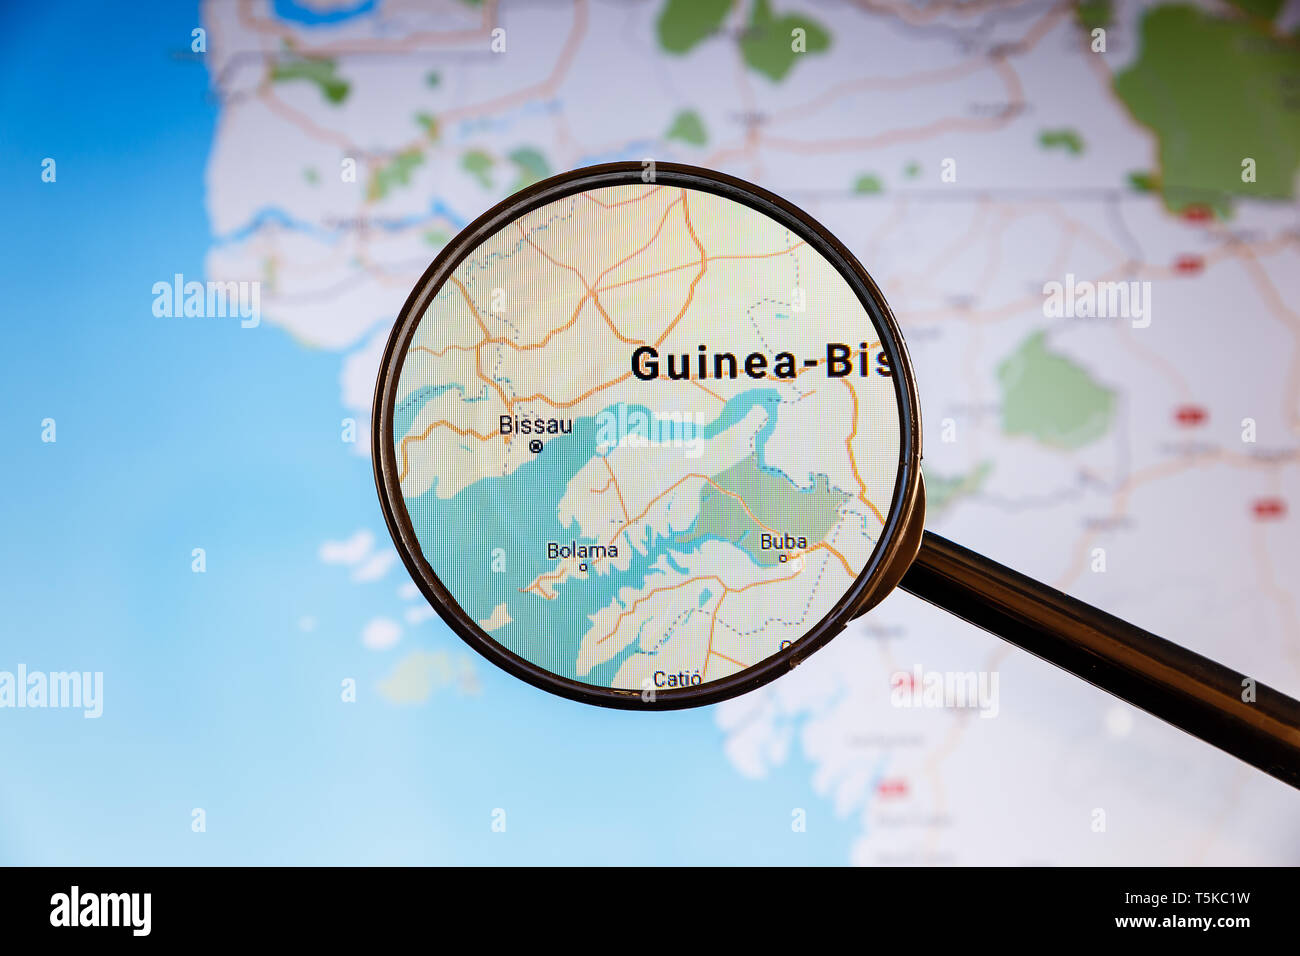 Bissau, Guinea-Bissau. Political map. City visualization illustrative concept on display screen through magnifying glass. Stock Photo